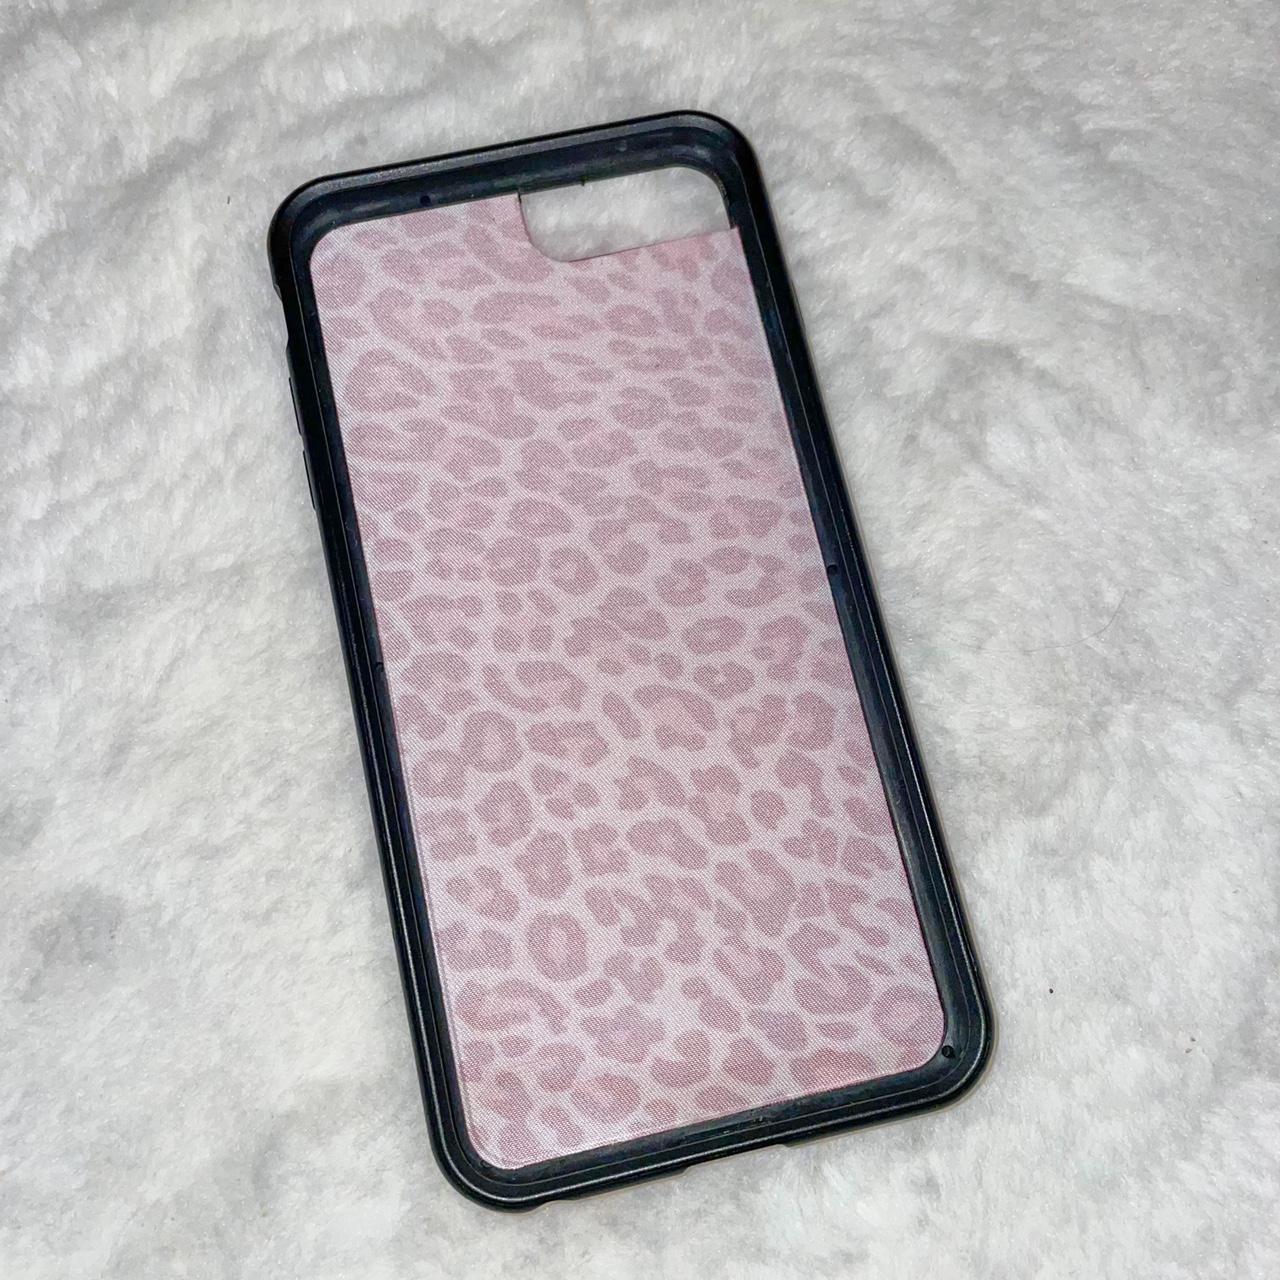 Product Image 4 - Wildflower pink cheetah phone case🌼

Adorable